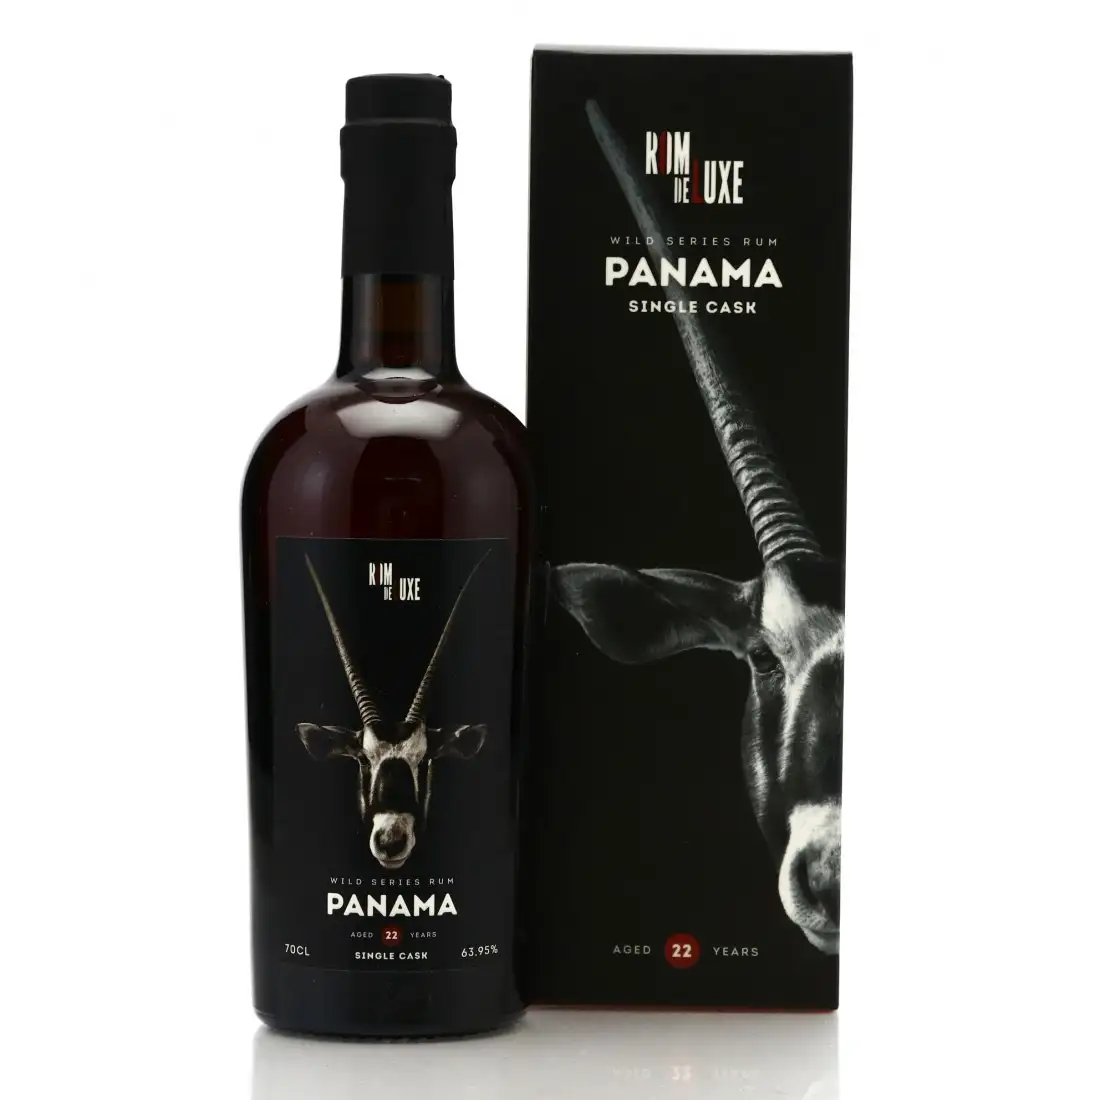 Image of the front of the bottle of the rum Wild Series Rum Panama No. 24 (Batch 1)